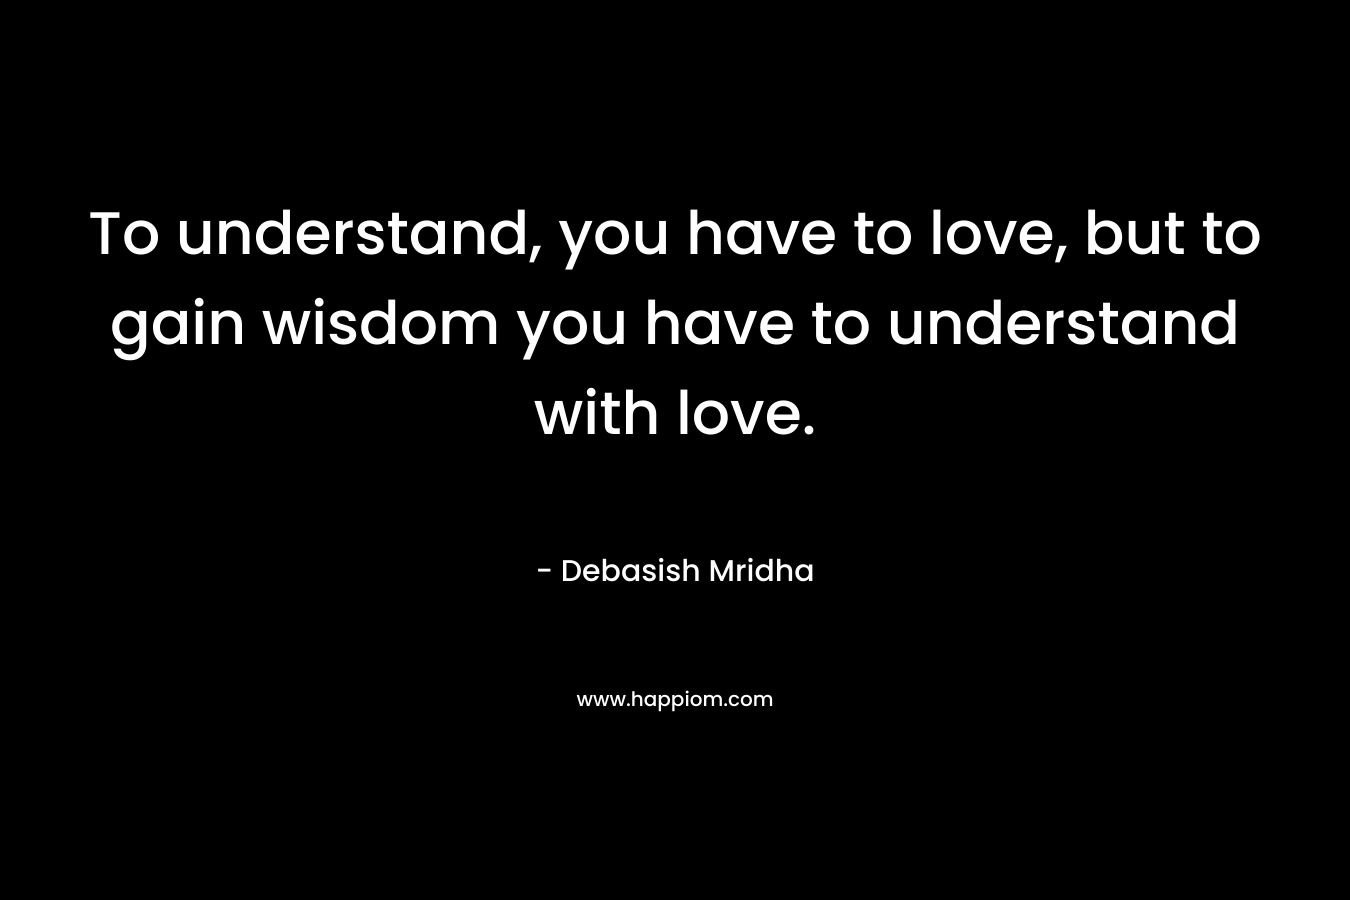 To understand, you have to love, but to gain wisdom you have to understand with love.